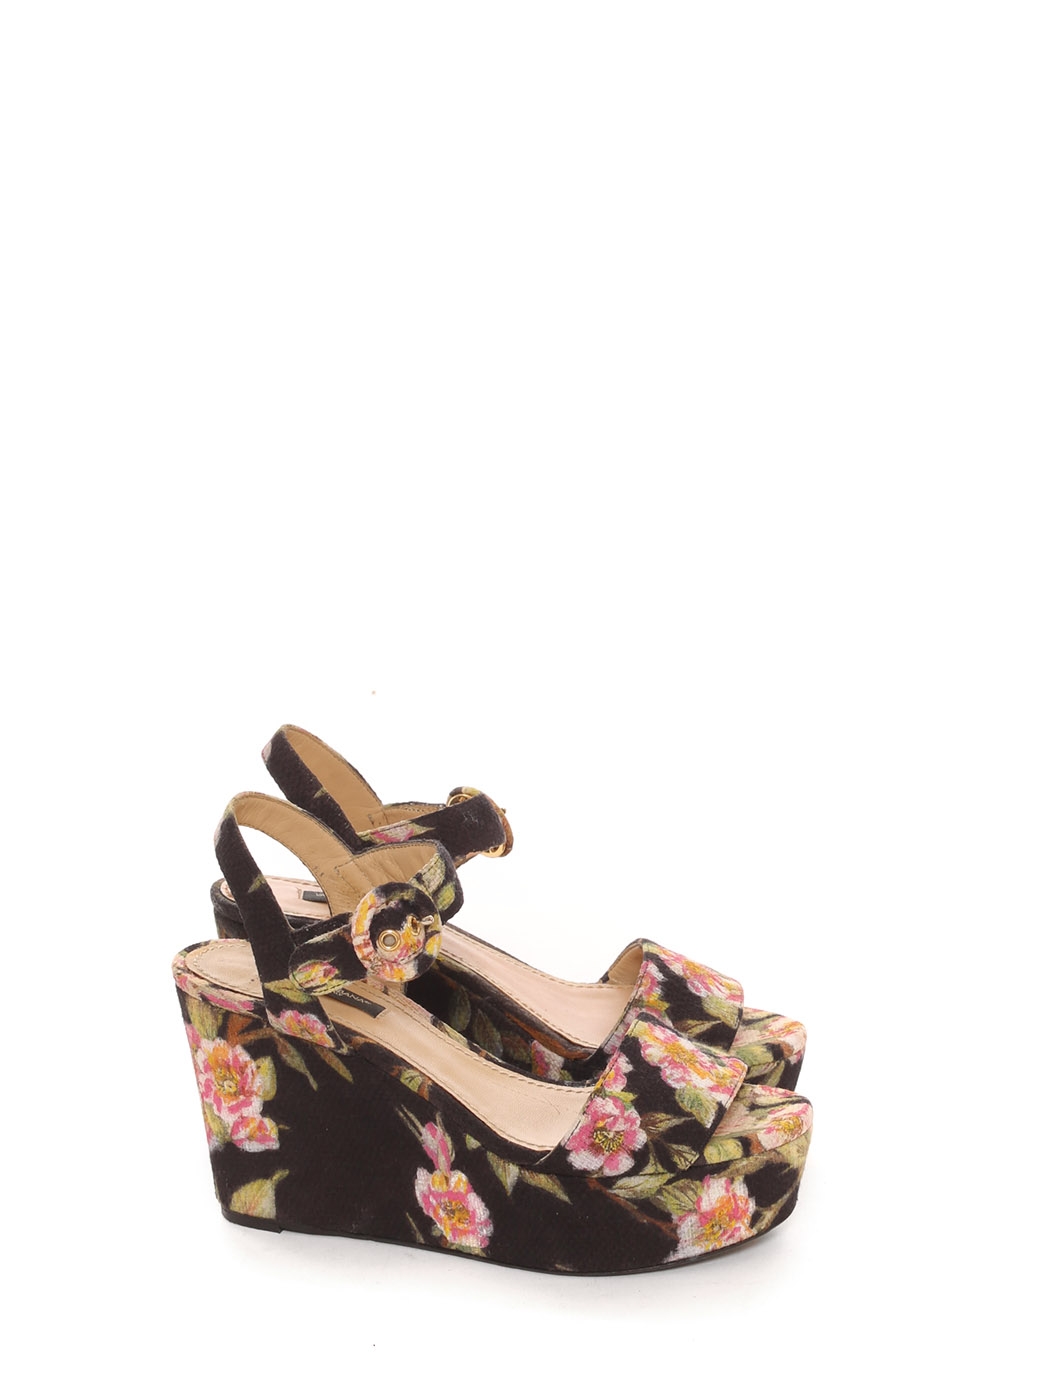 Boutique DOLCE & GABBANA Black, pink and green floral print canvas BIANCA  wedge sandals Retail price €575 Size 36